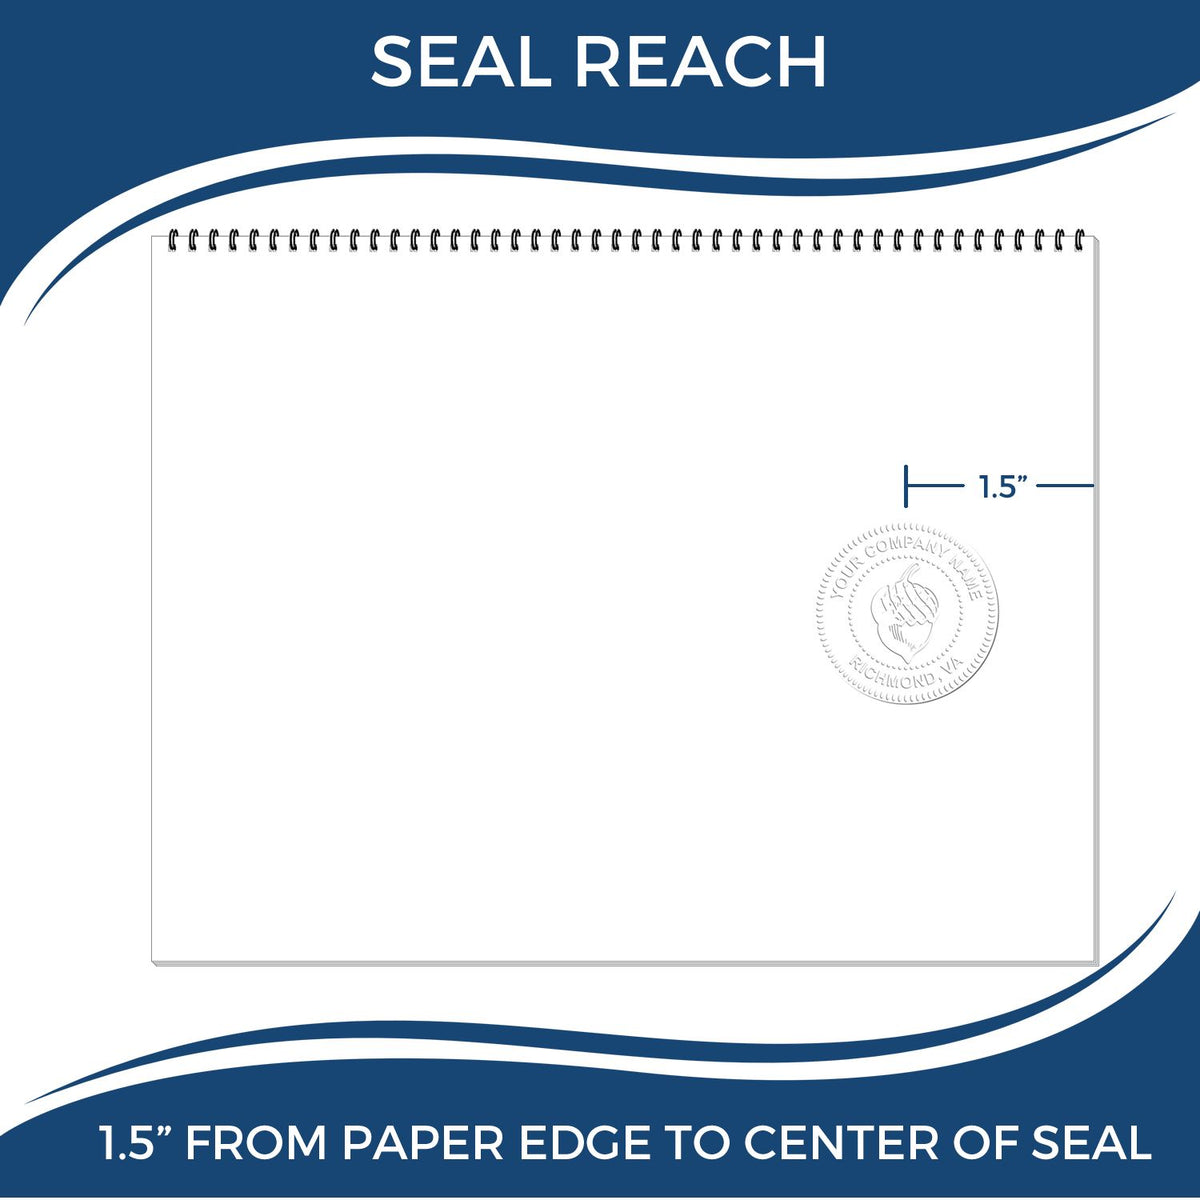 An infographic showing the seal reach which is represented by a ruler and a miniature seal image of the Gift Nebraska Geologist Seal